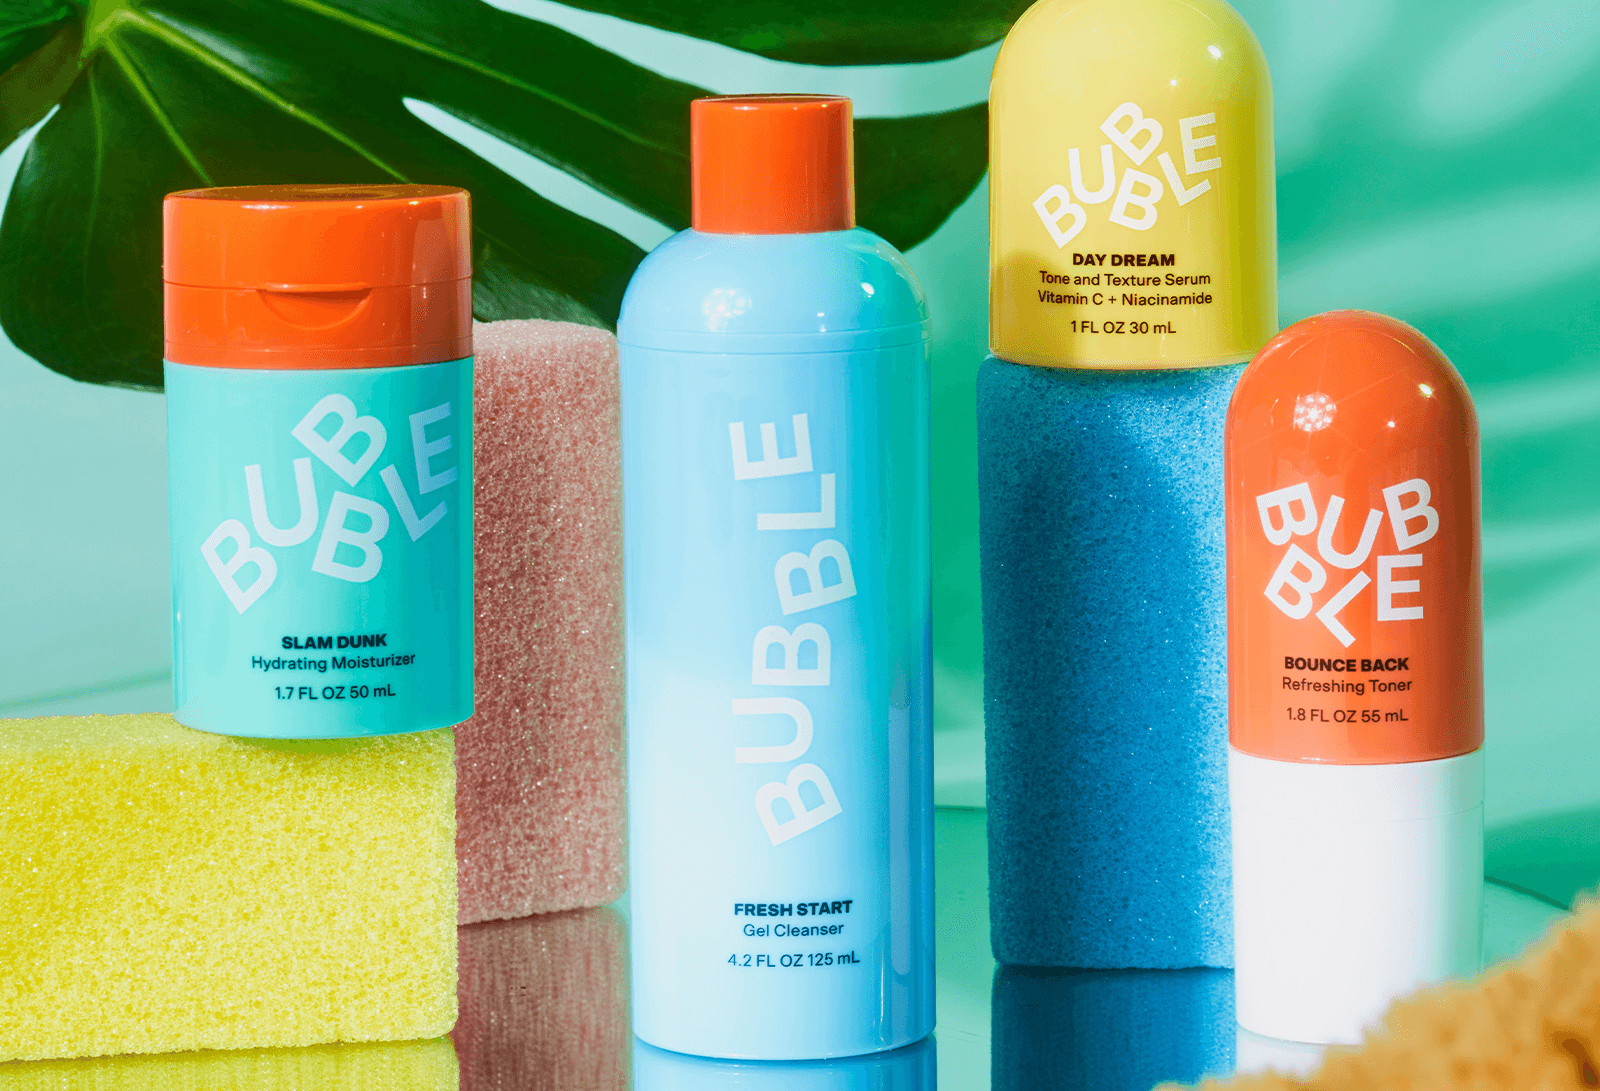 Bubble Skincare expands distribution into specialty retail; launches into  Ulta Beauty - Global Cosmetics News